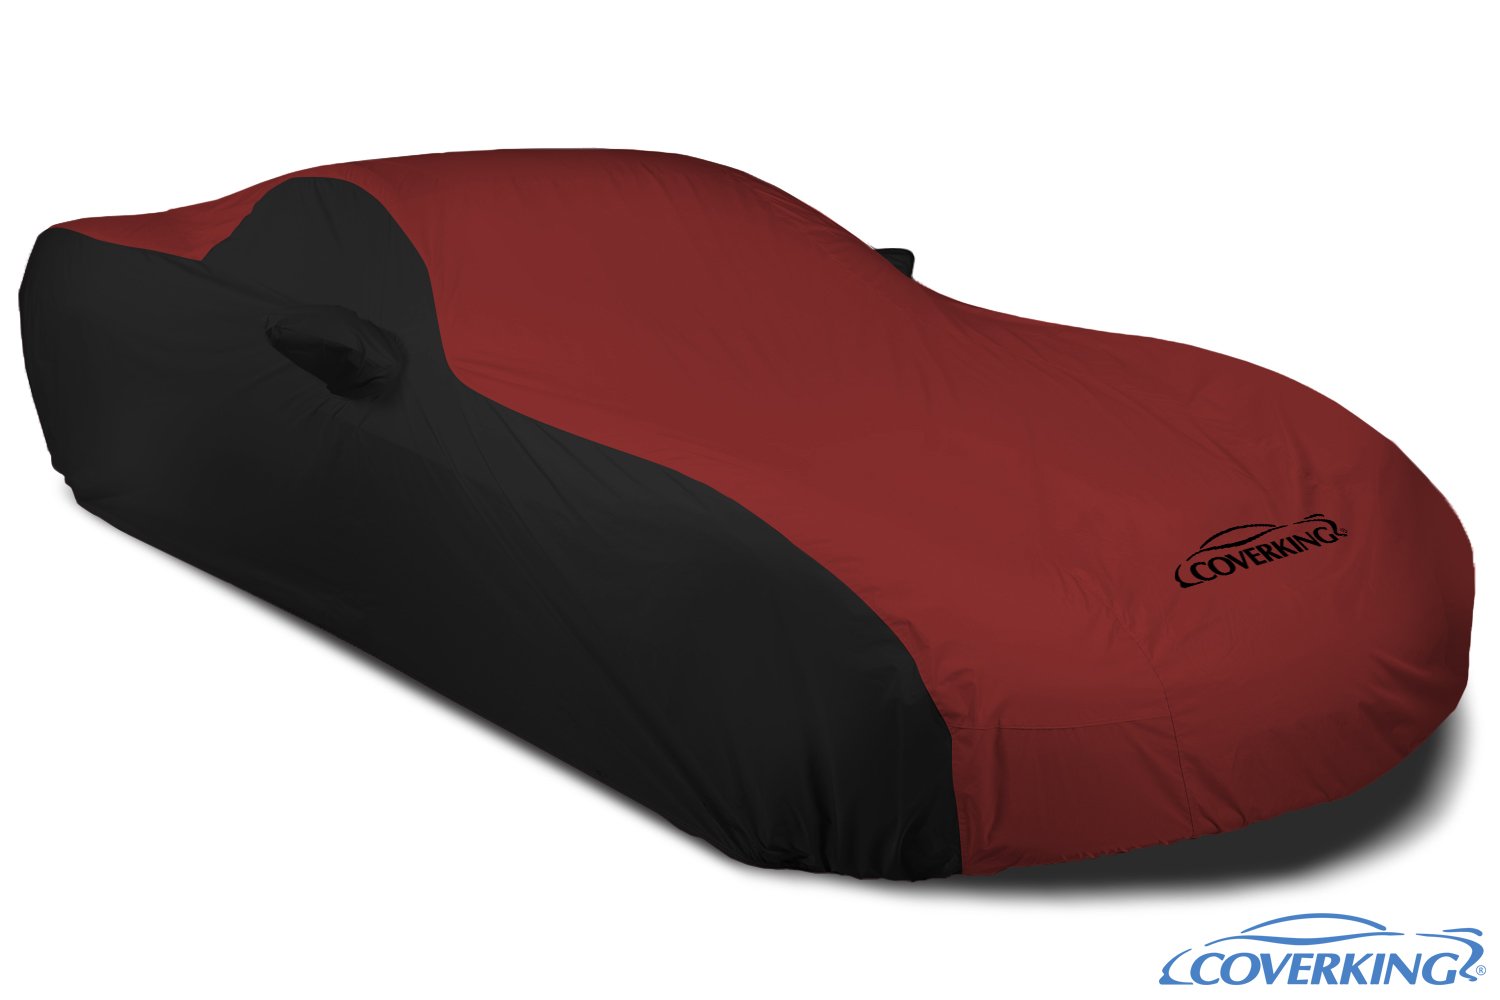 Coverking Stormproof All Weather C5 Corvette Car Cover